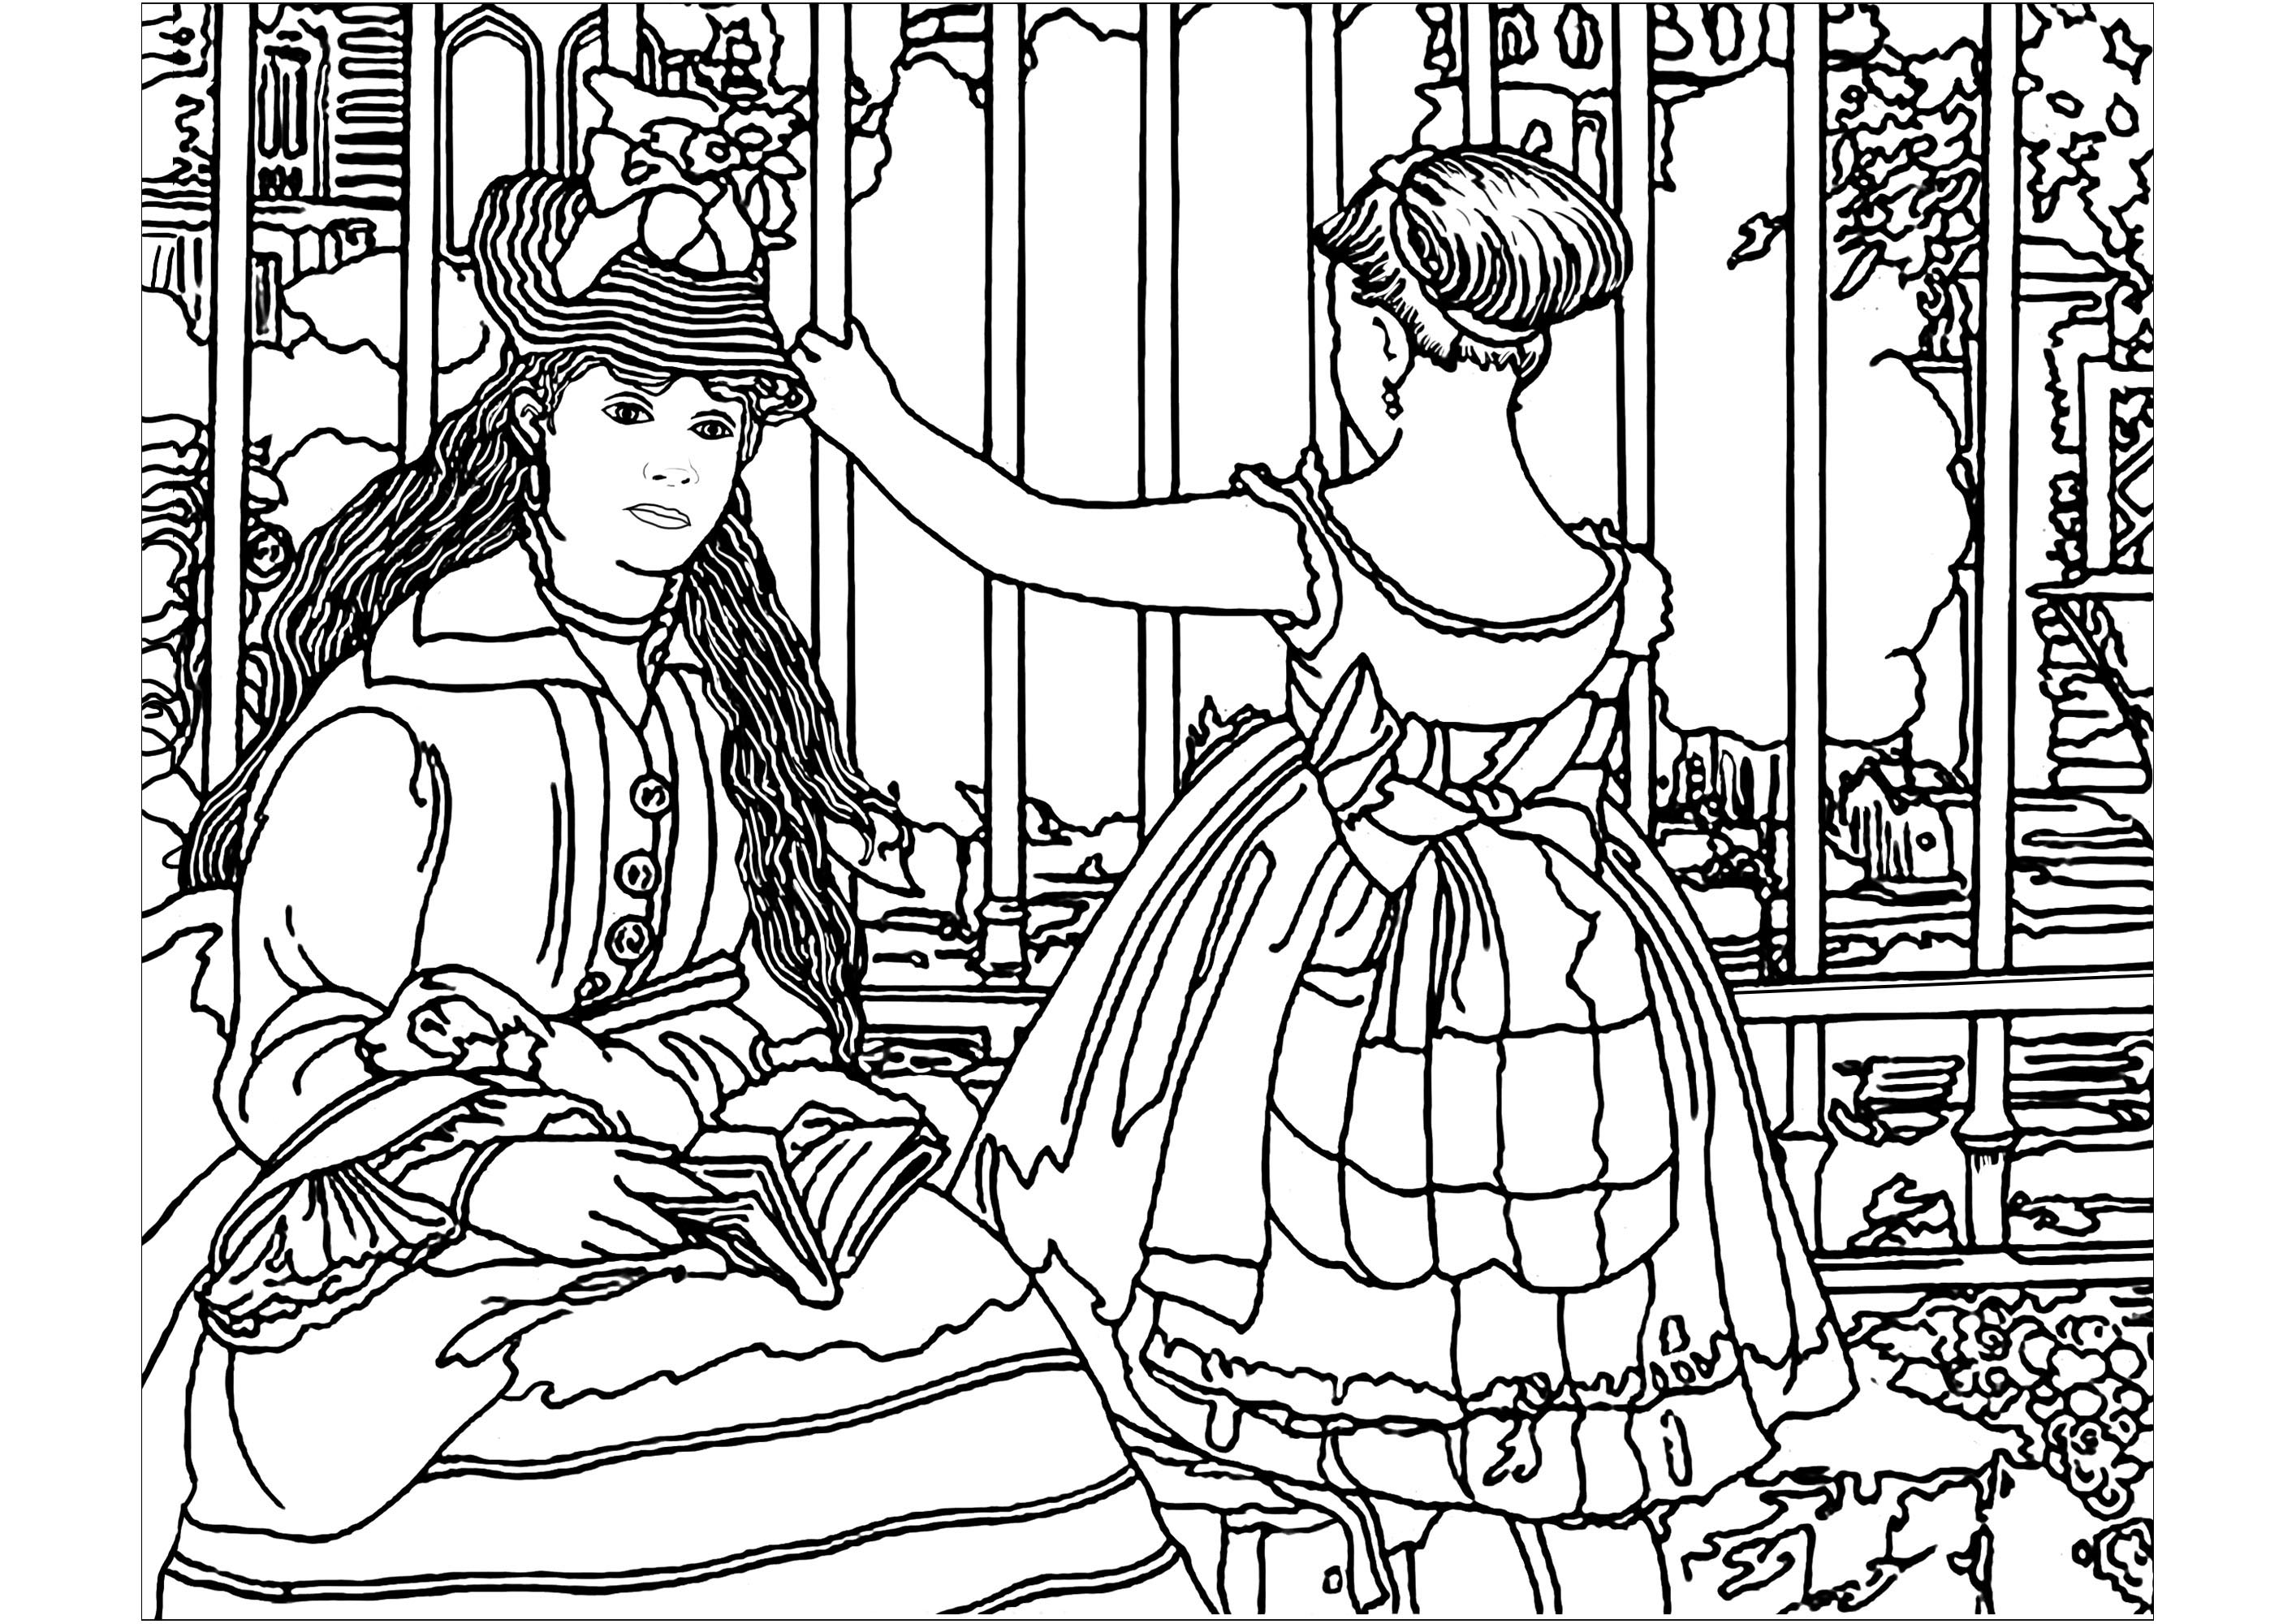 Coloring page inspired by a work by Impressionist painter Édouard Manet : The railway, Artist : Art. Isabelle